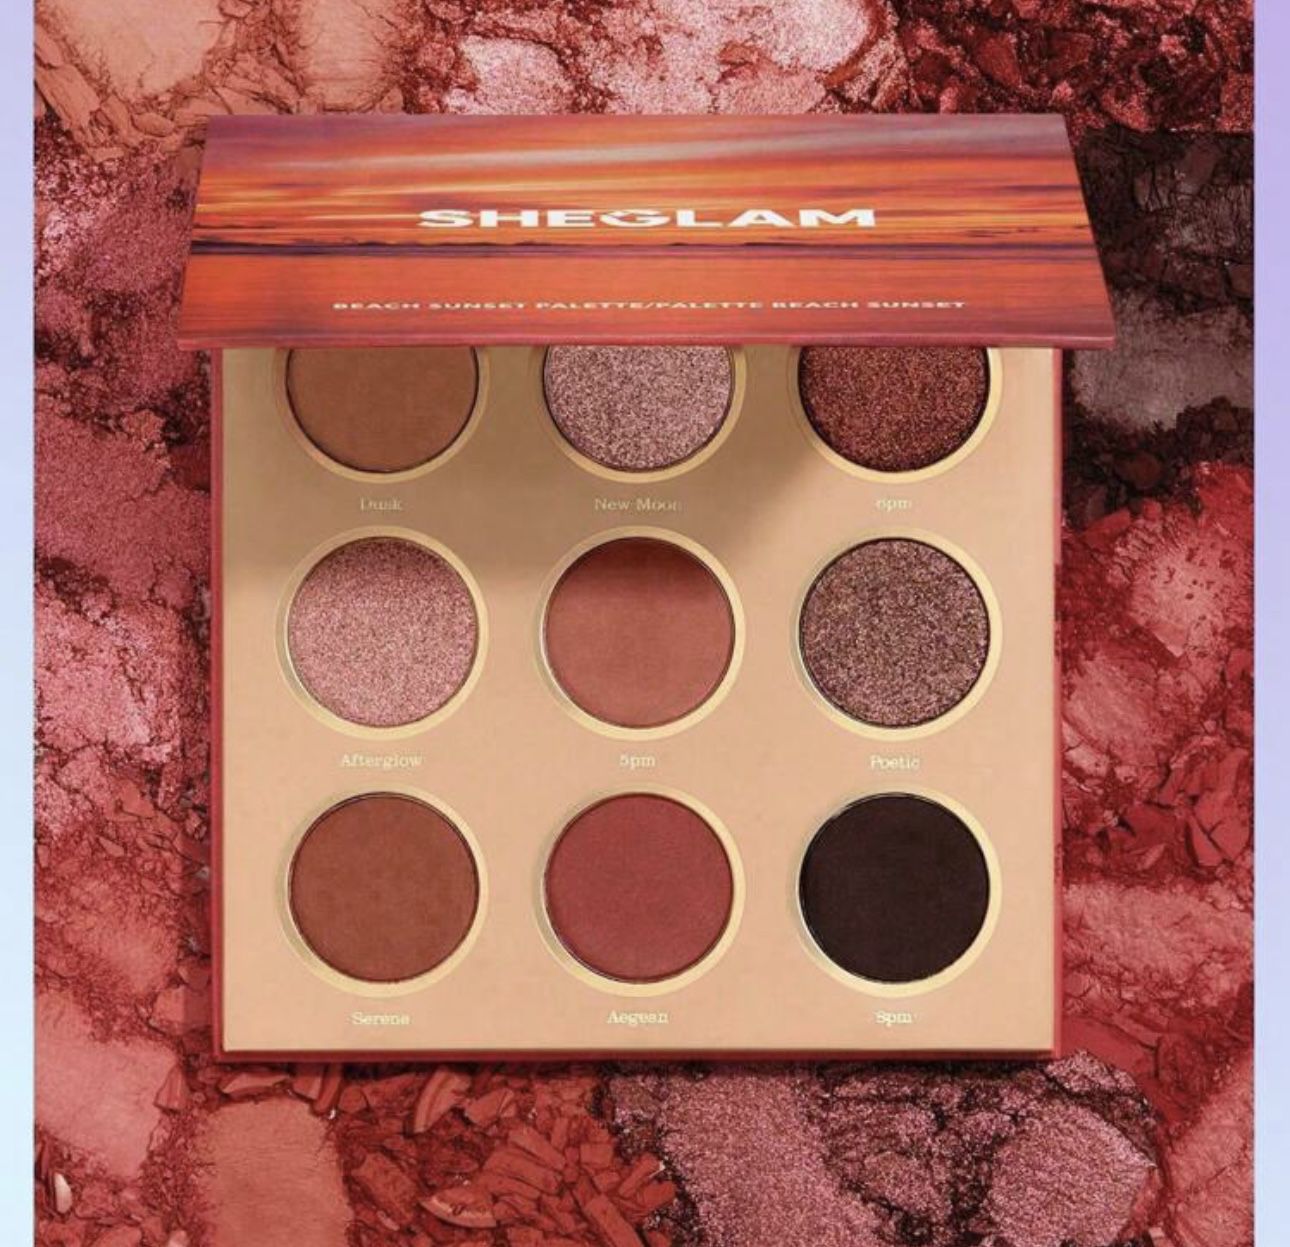 New SHEGLAM Beach Sunset Palette 9-Color Shimmer Matte shadow Palette Metallic Shine Evenly Pigmented Smooth Blendable Styling Makeup 